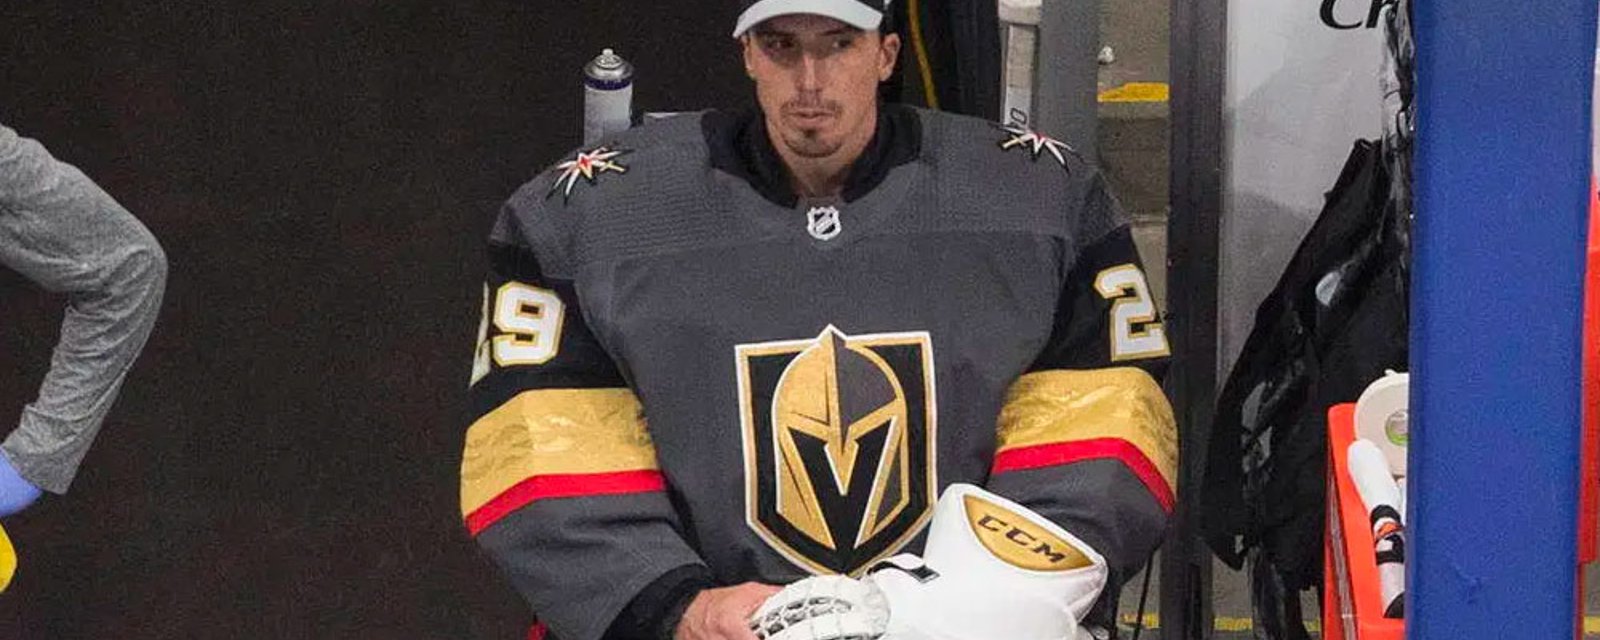 Stunning rumour surfaces on Fleury potential trade! 